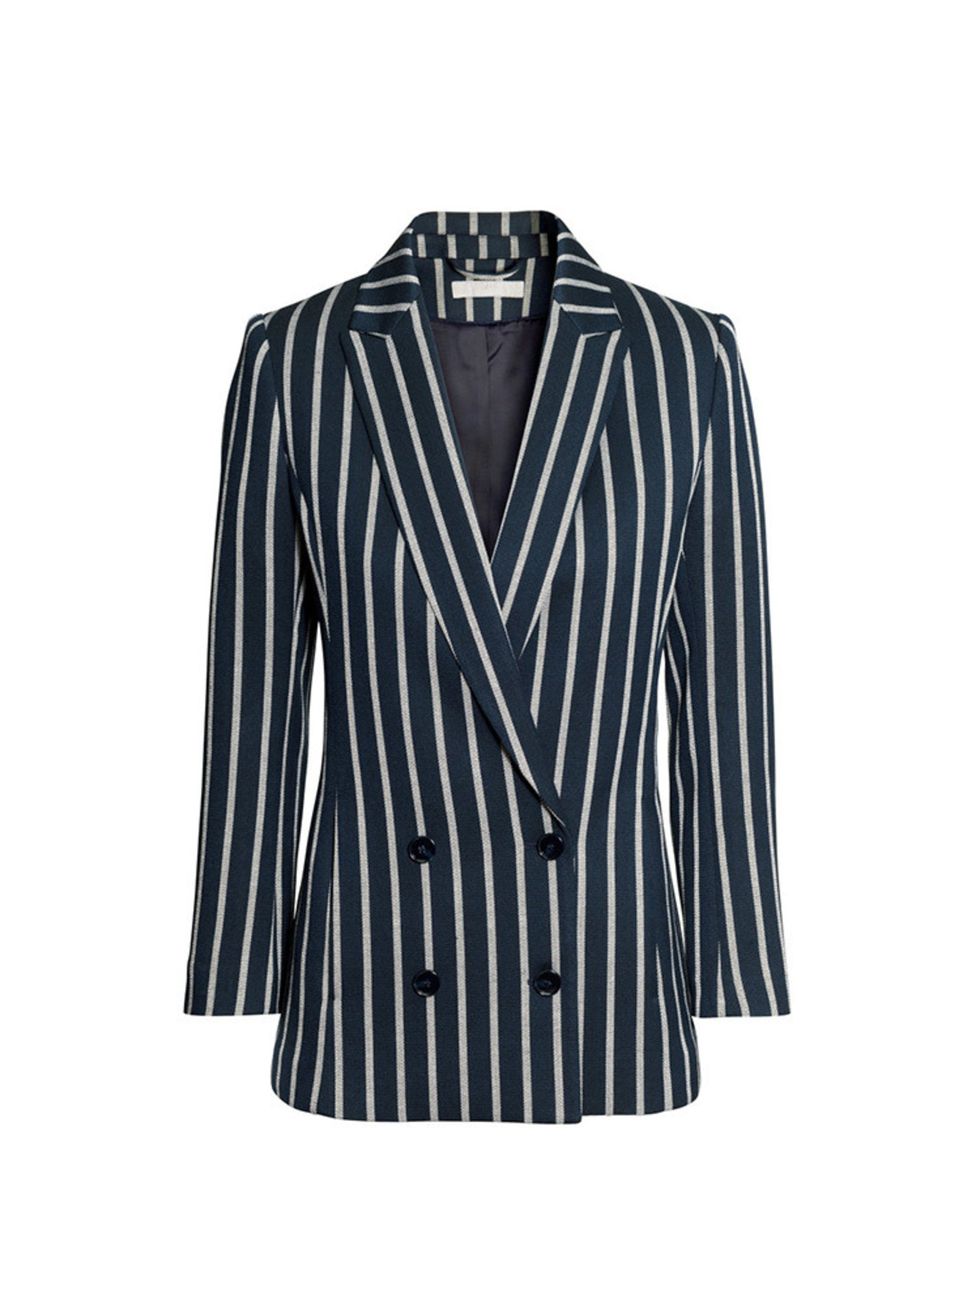 <p><a href="http://www.hm.com/gb/product/89688?article=89688-A" target="_blank">H&M</a> blazer, £39.99 </p>